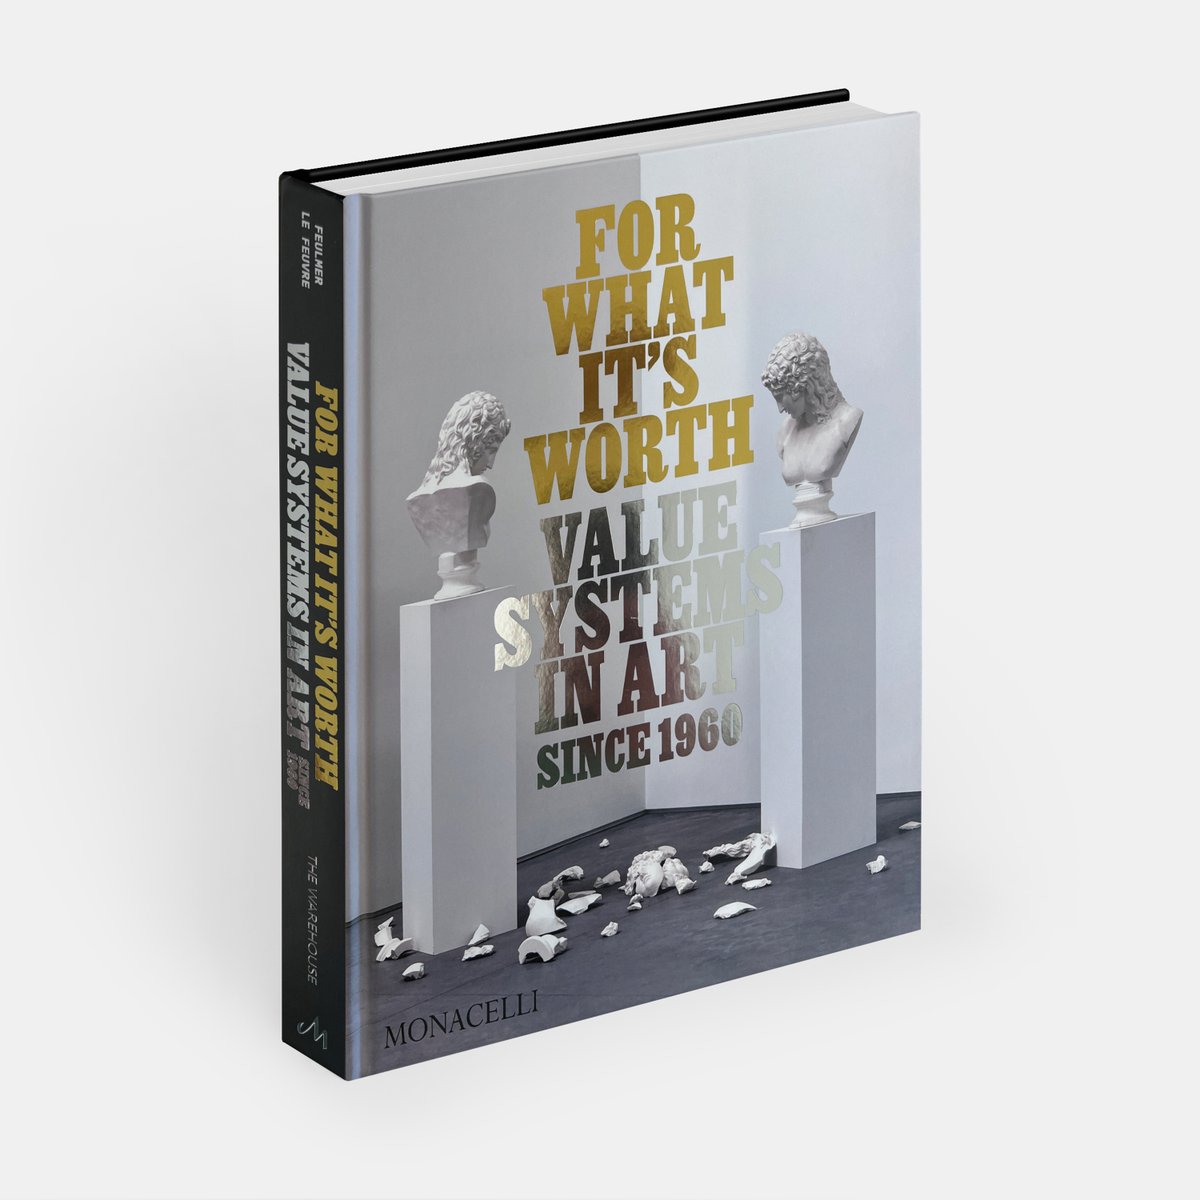 Out now: 'For What It's Worth: Value Systems in Art since 1960' 🎨 The book looks at artists who generate, question, and infect value systems through their work. 📘 Order here: eu1.hubs.ly/H08mkcK0